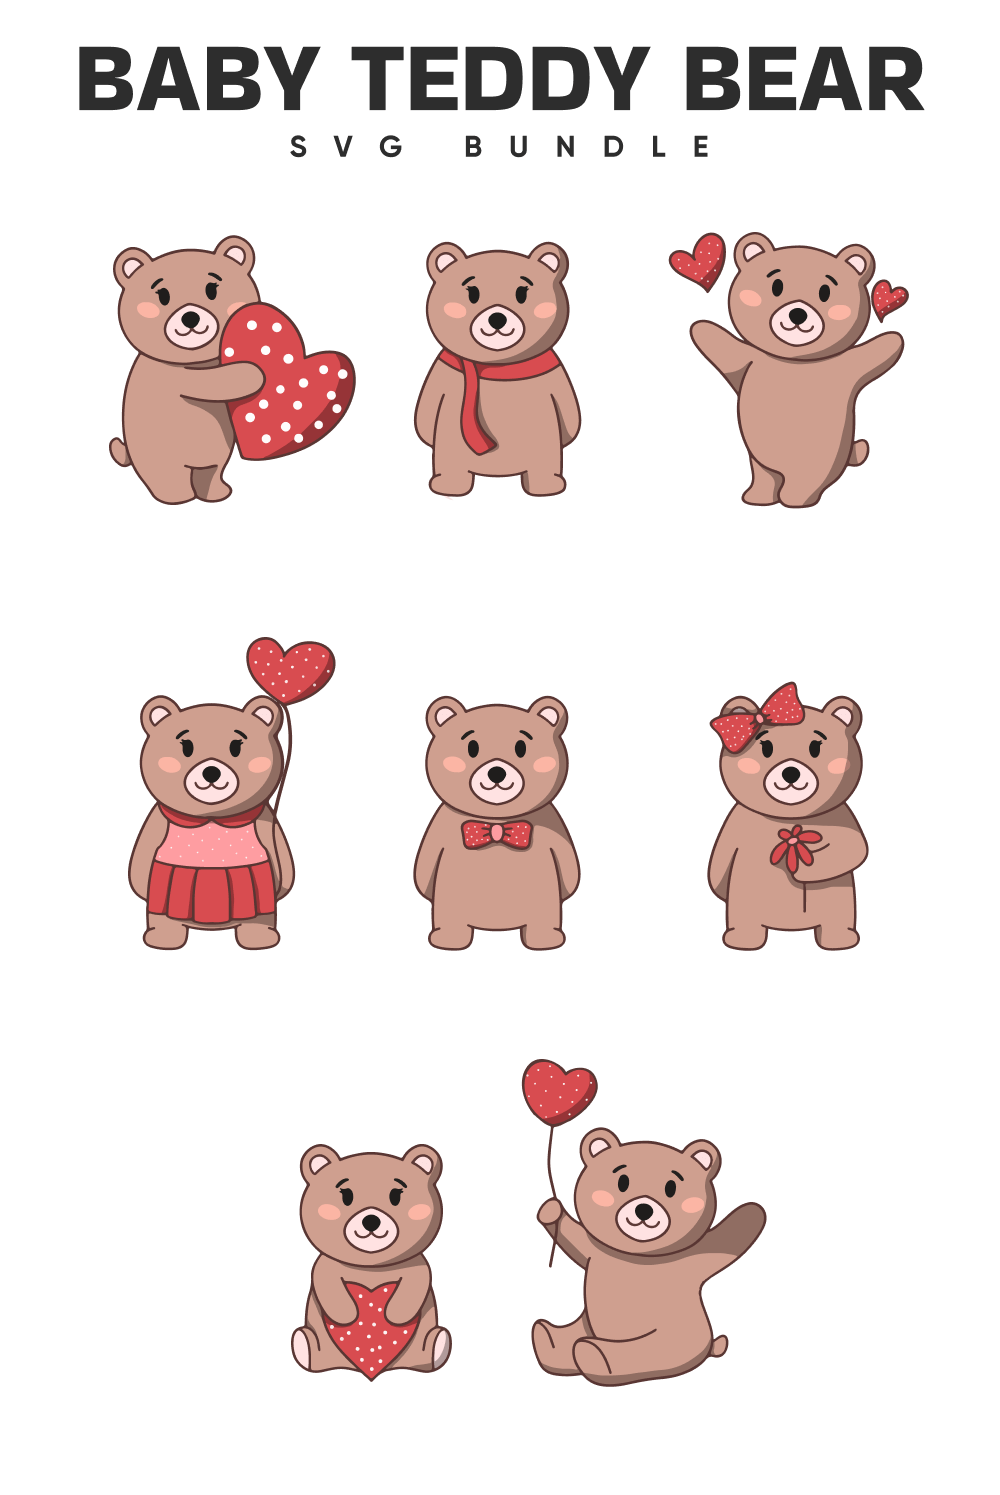 Bunch of teddy bears with hearts on them.